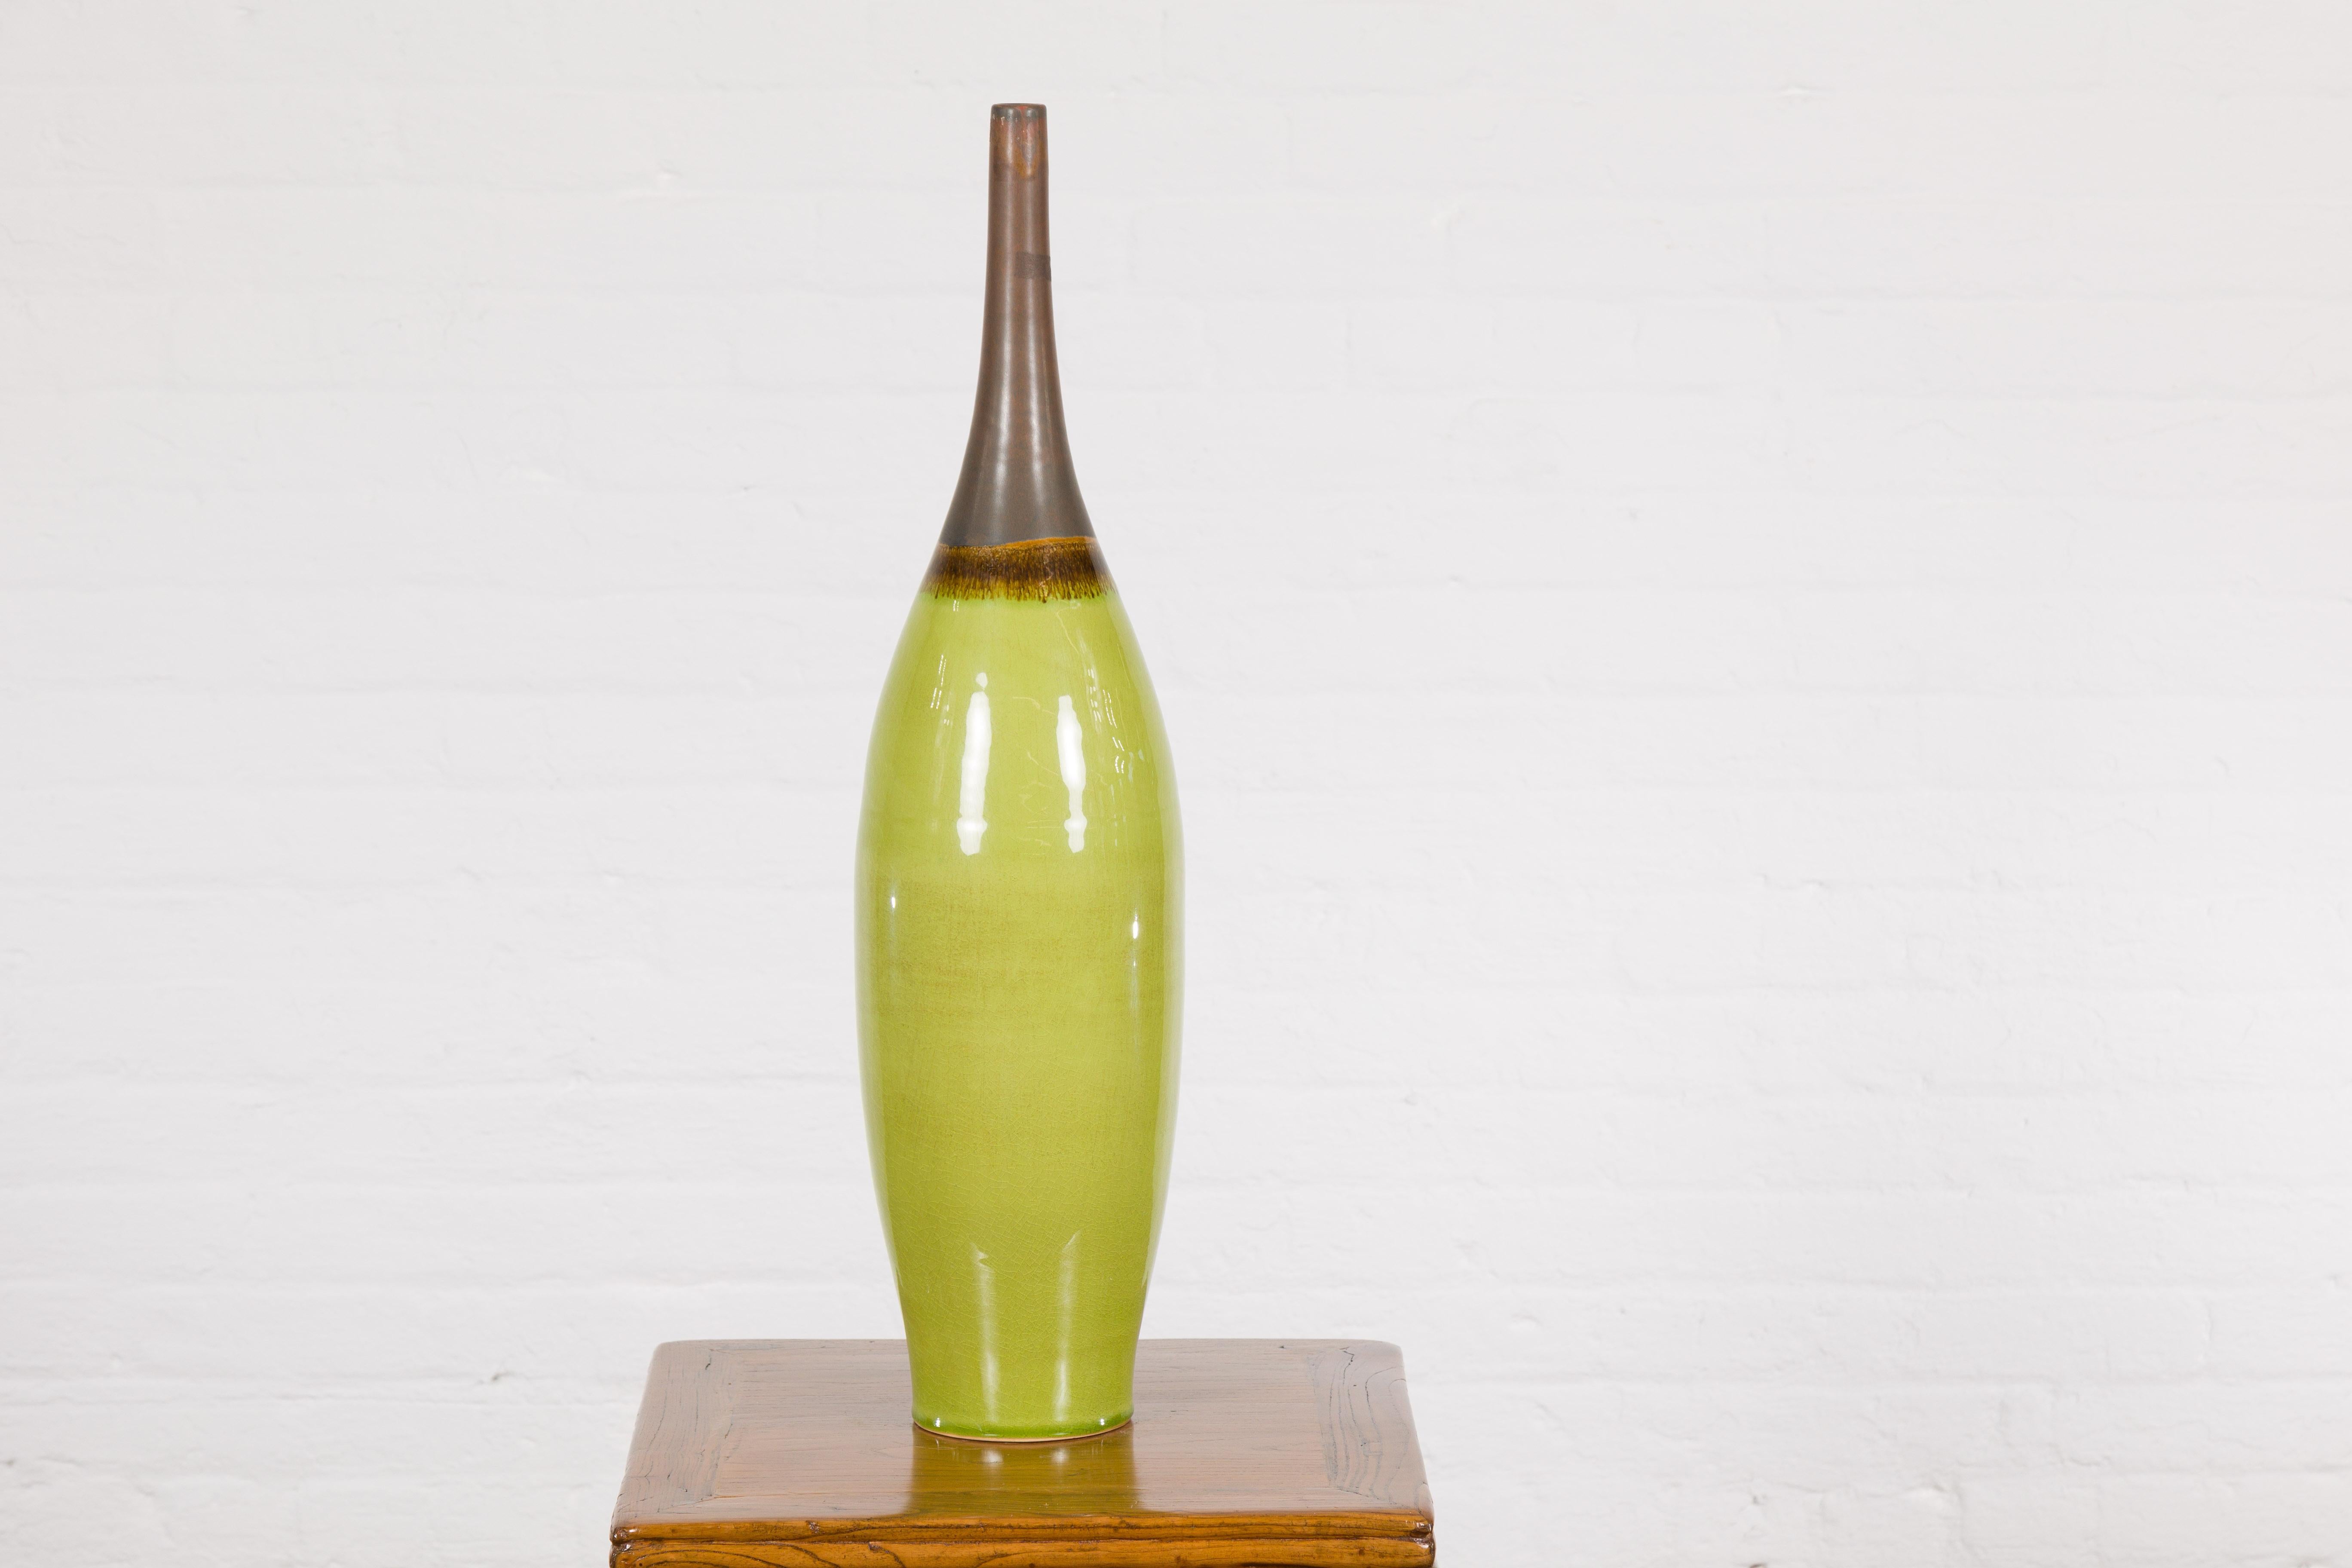 Artisan Handmade Lime Green Glazed Ceramic Vase with Brown Neck In Excellent Condition For Sale In Yonkers, NY